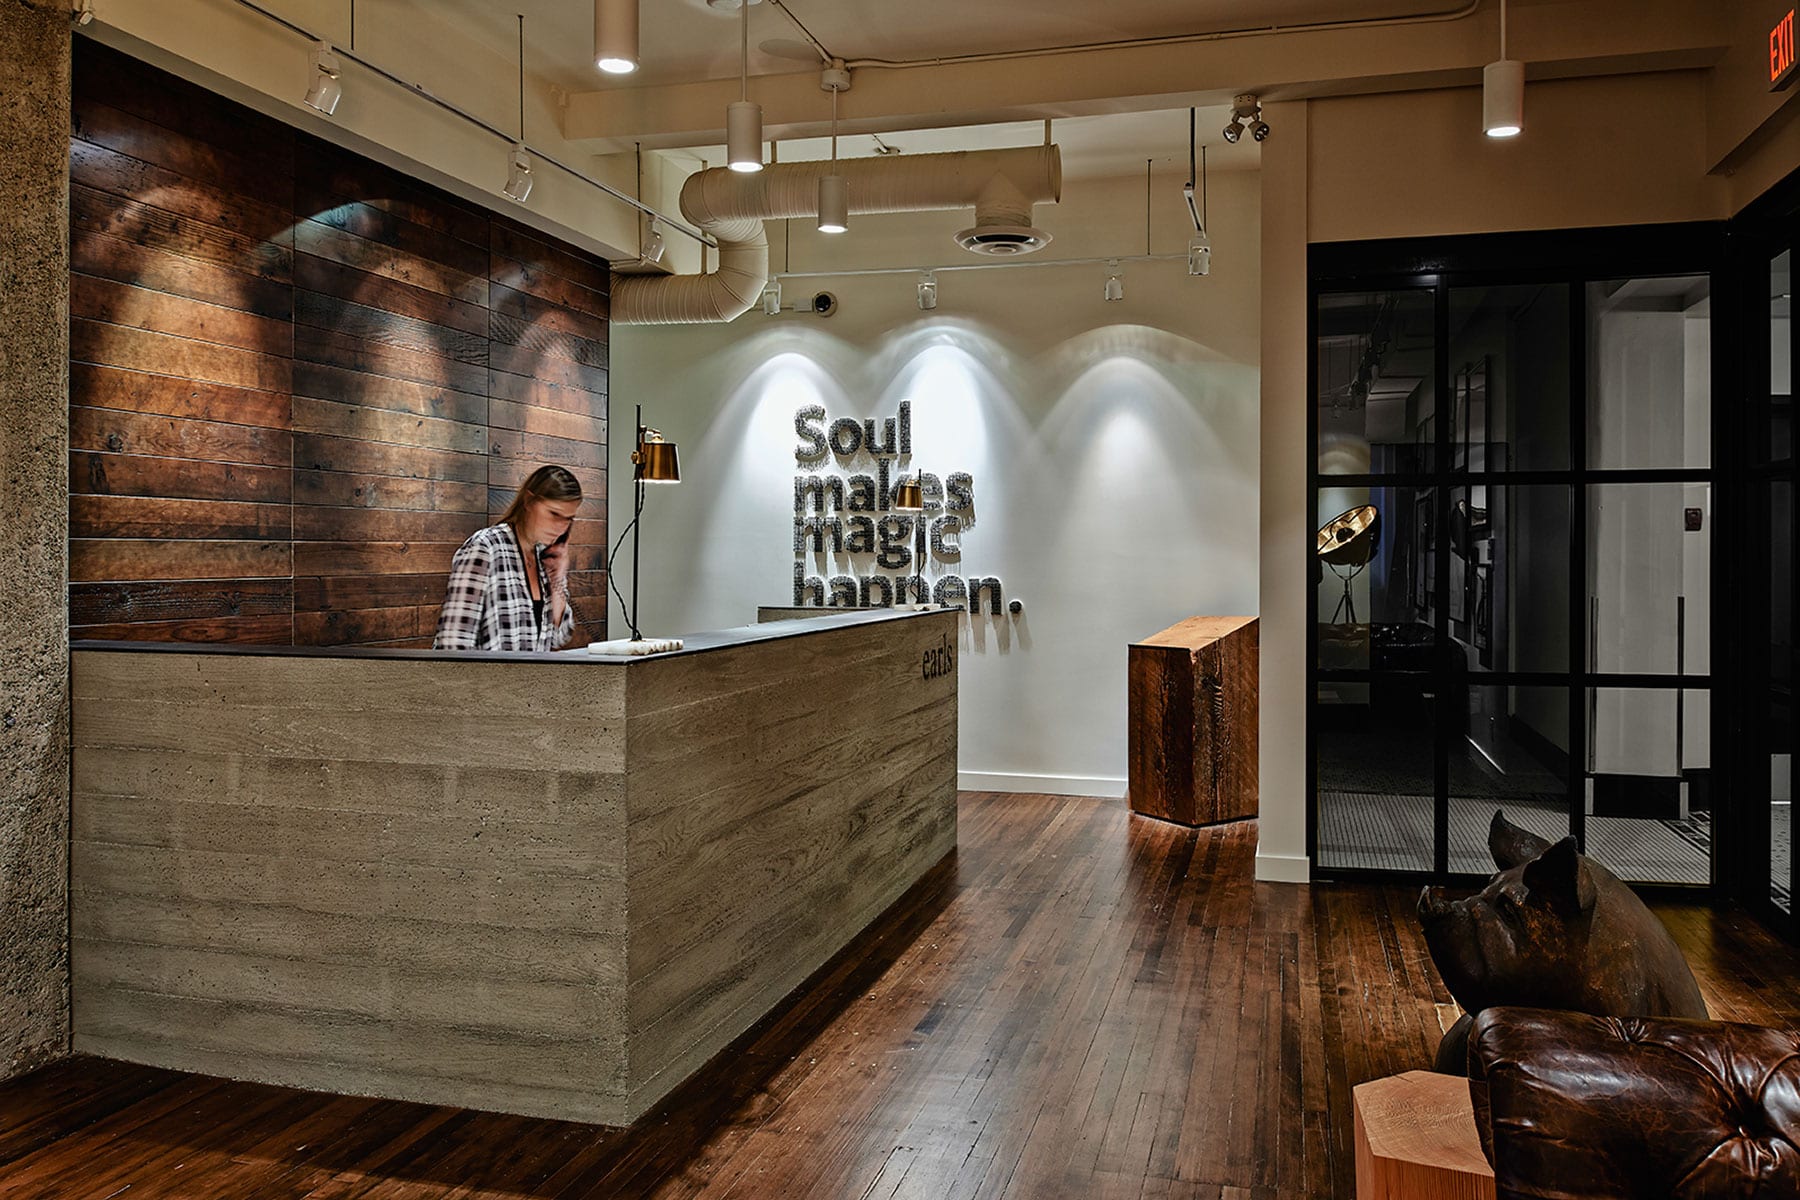 earls vancouver head office reception area with signage: soul makes magic happen